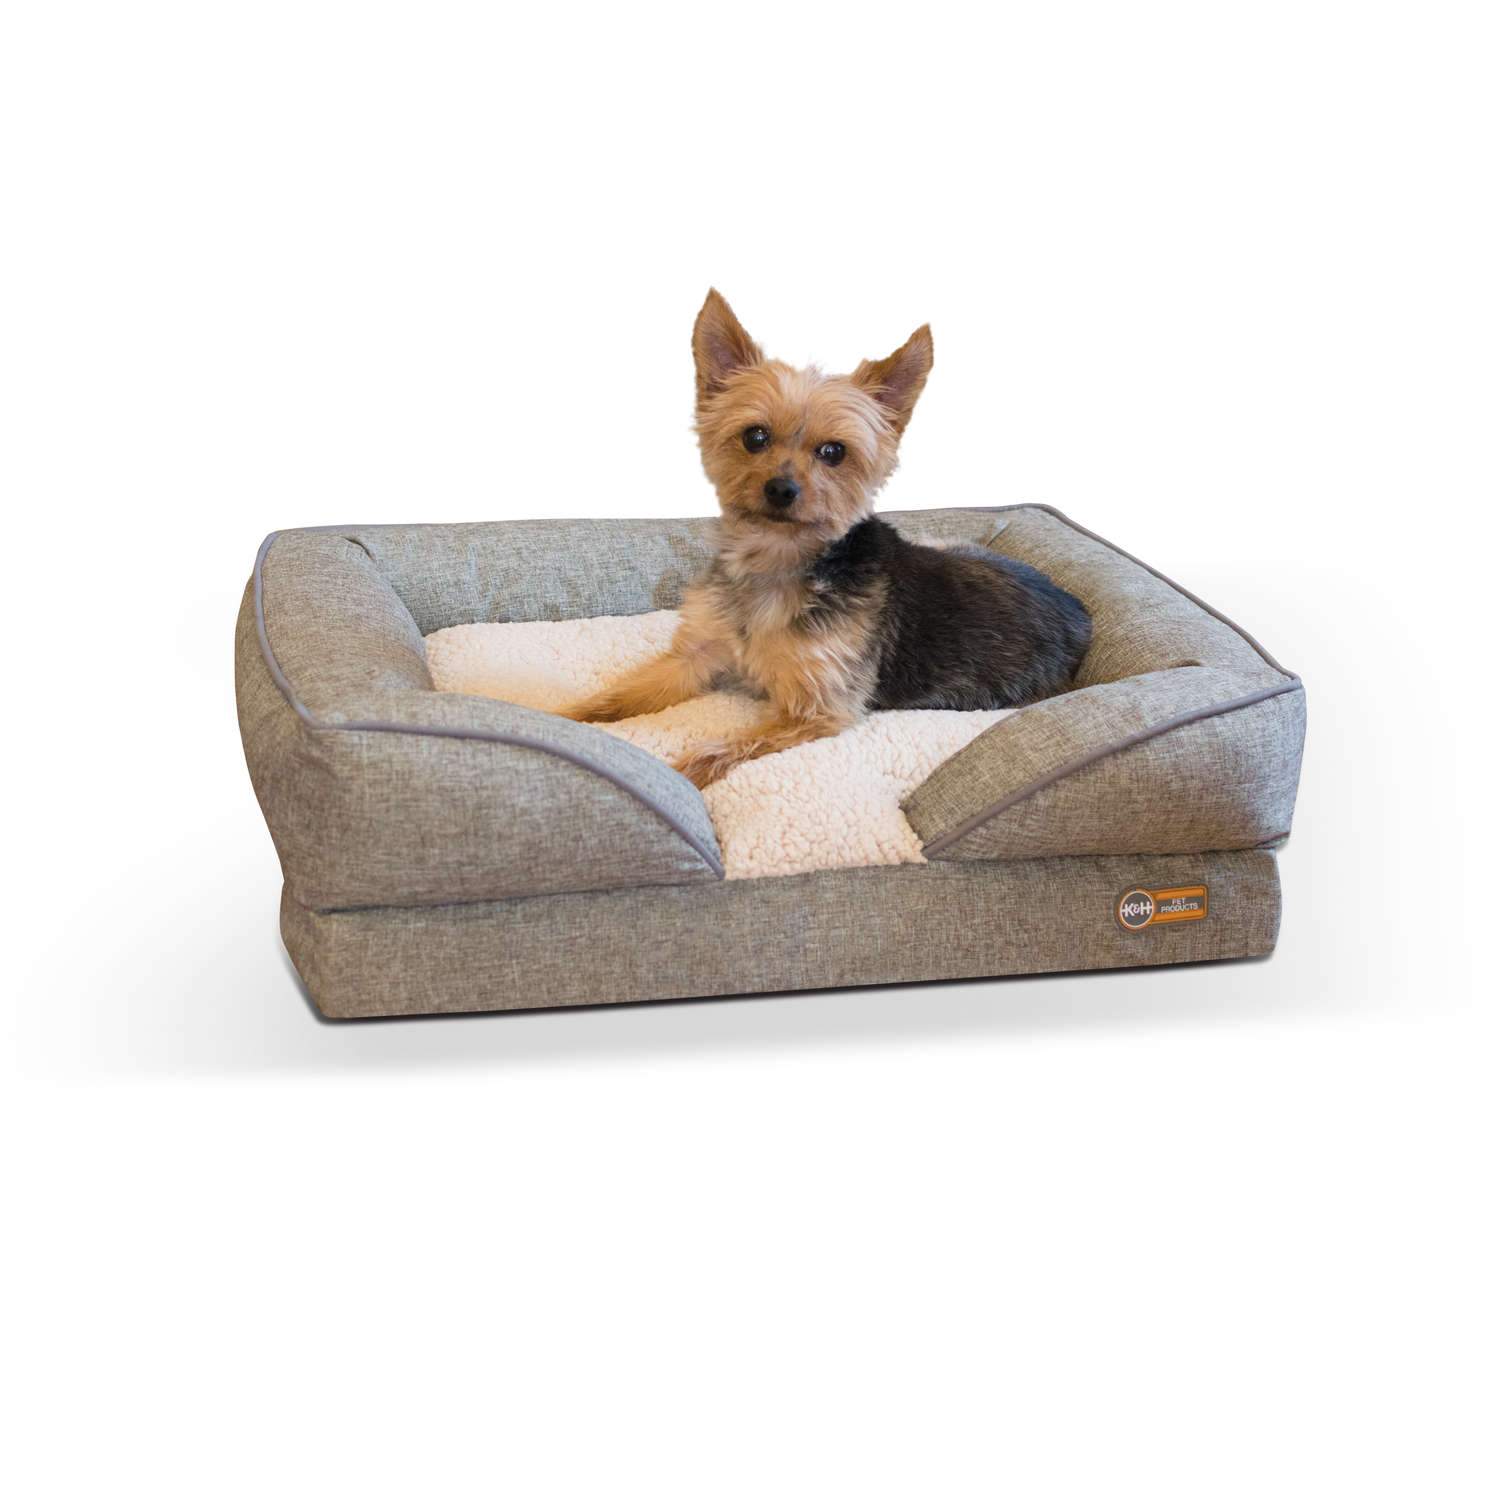 K&h Pet Products Kh4771 Pillow-top Orthopedic Pet Lounger